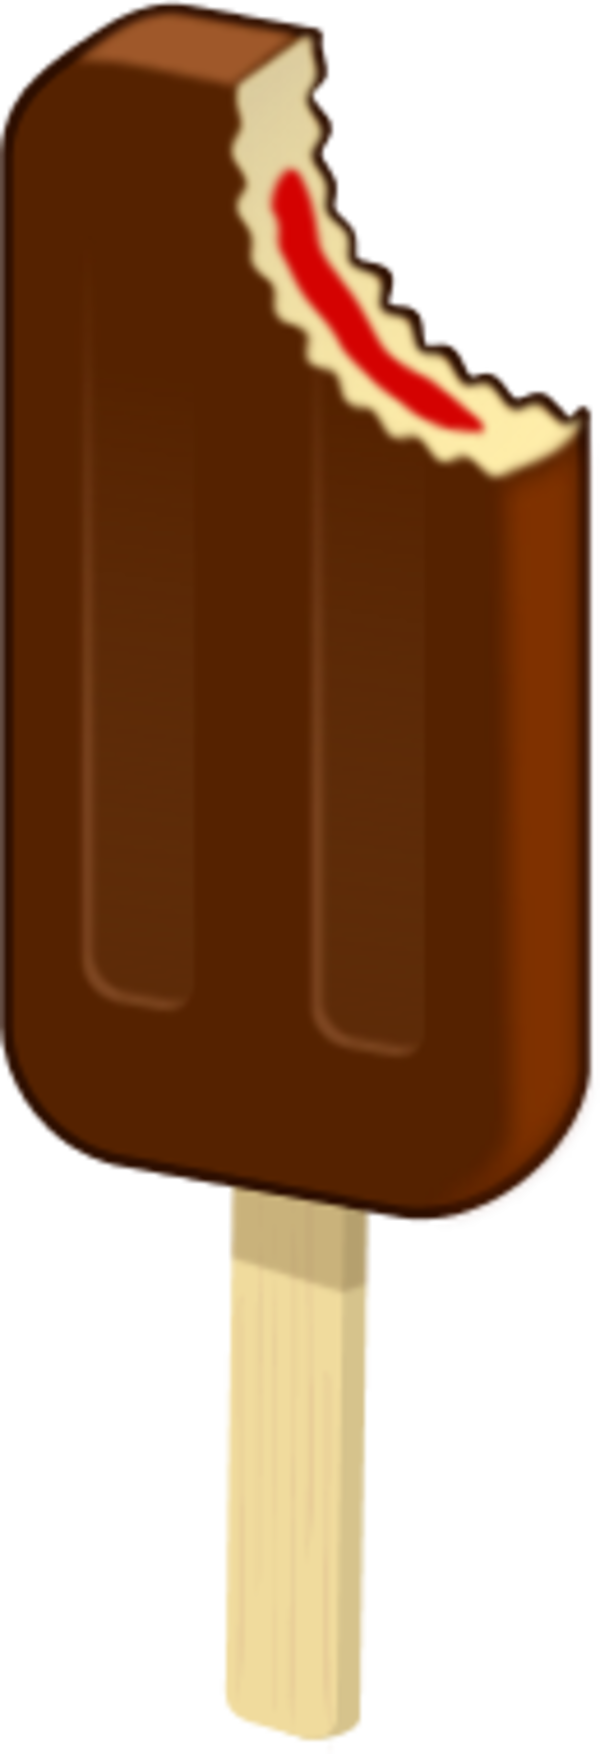 Chocolate Ice Cream Clipart - Chocolate Popsicle Clipart (600x1754)